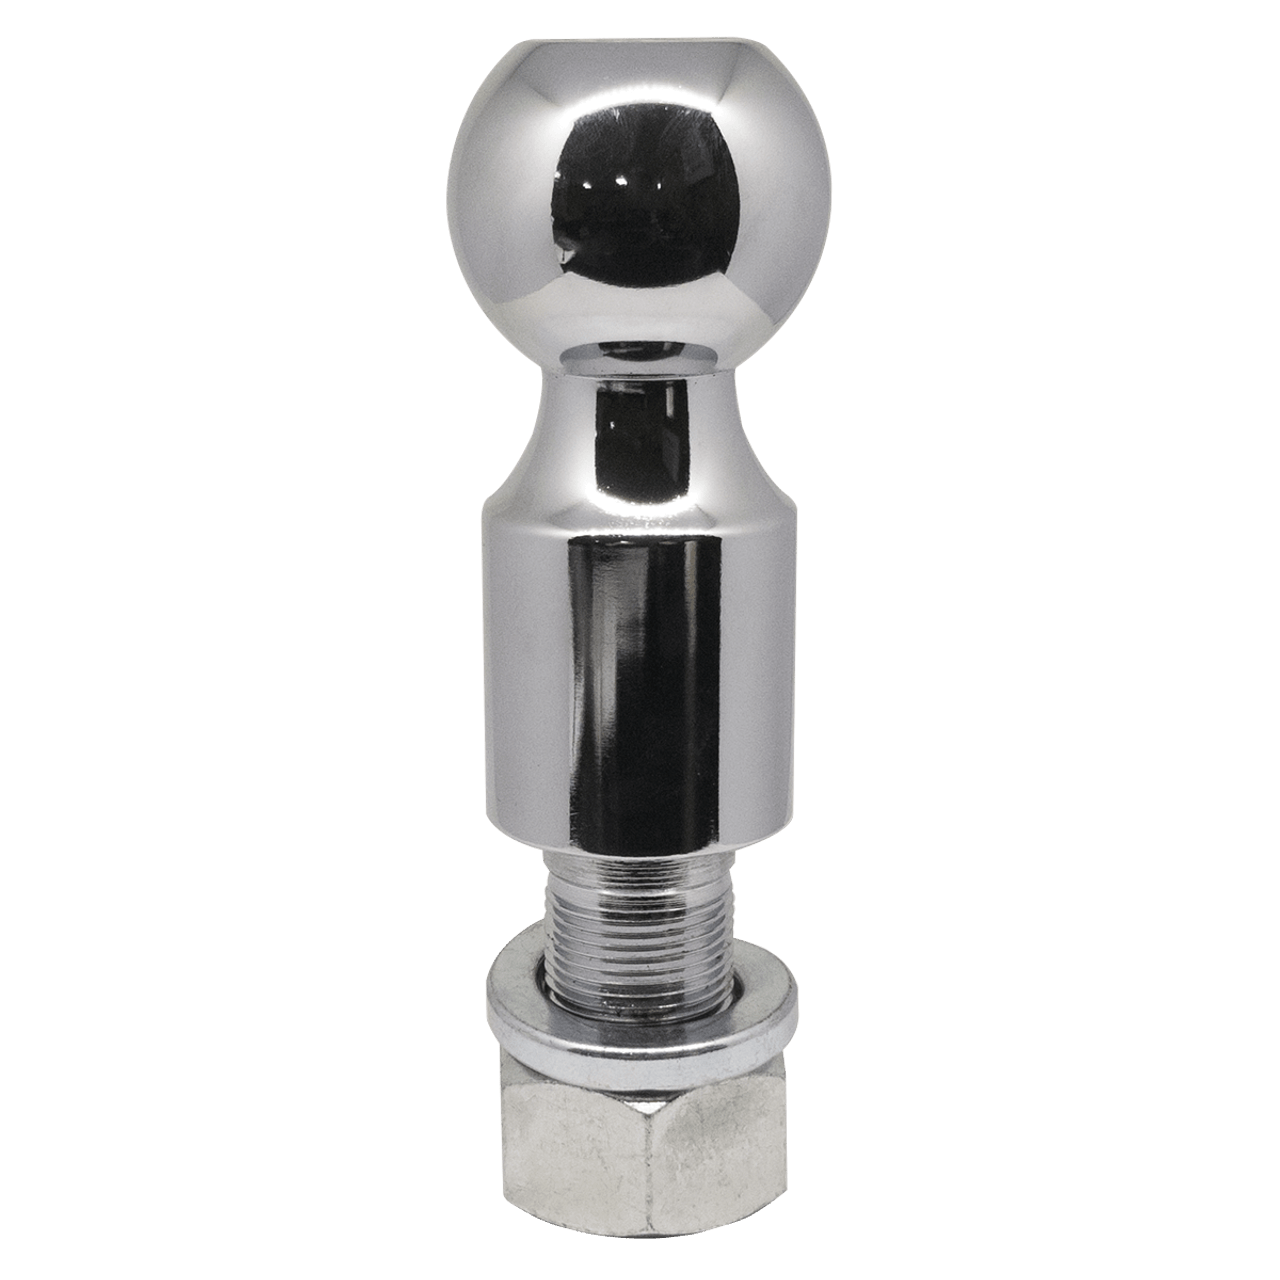 L25162 --- 2-5/16" Hitch Ball with extra rise, 5,000 lb Capacity, Chrome Finish